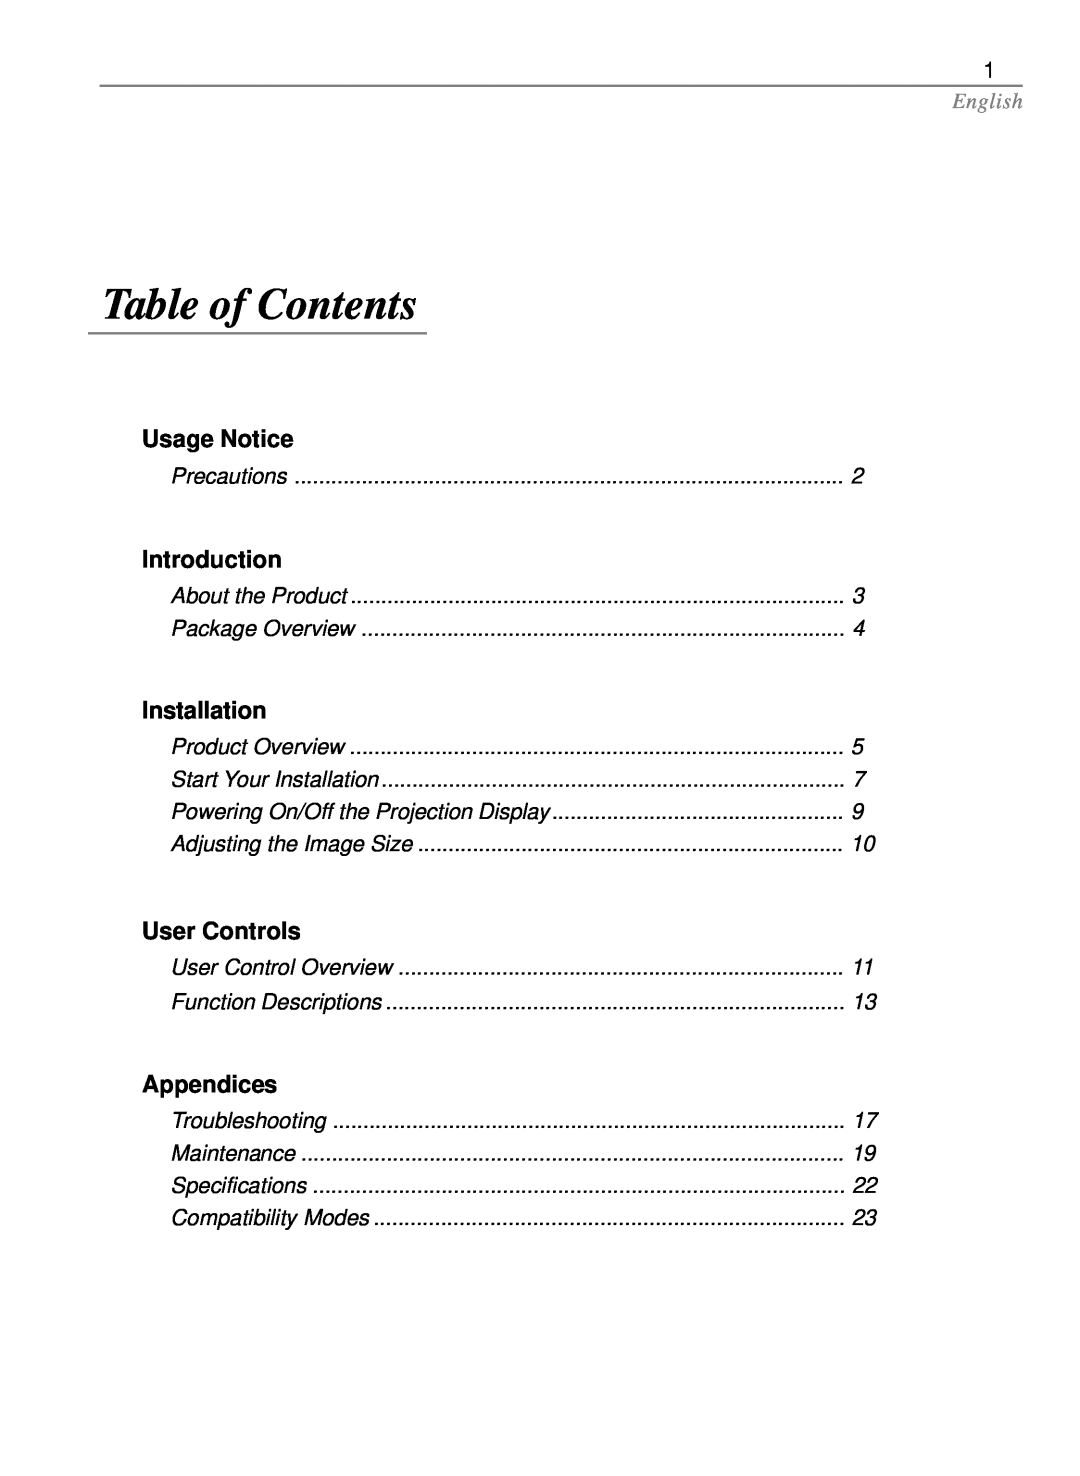 Optoma Technology EP585 specifications Table of Contents, Usage Notice, Introduction, Installation, User Controls, English 